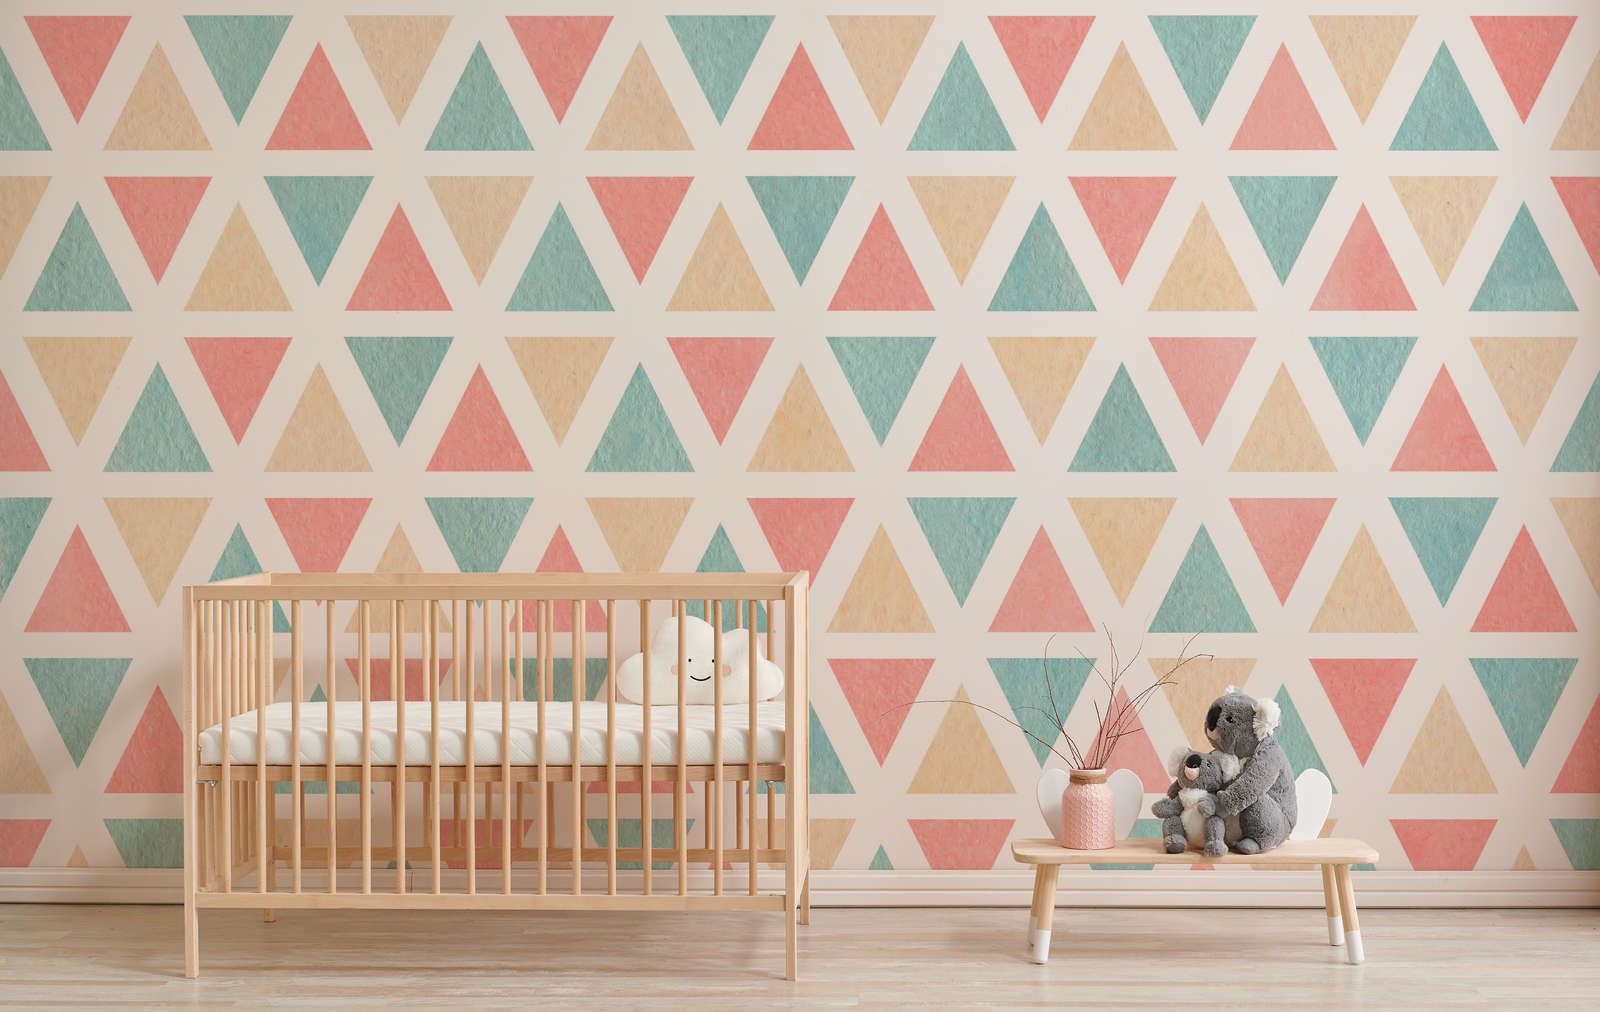             Photo wallpaper graphic pattern with colourful triangles - Smooth & pearlescent fleece
        